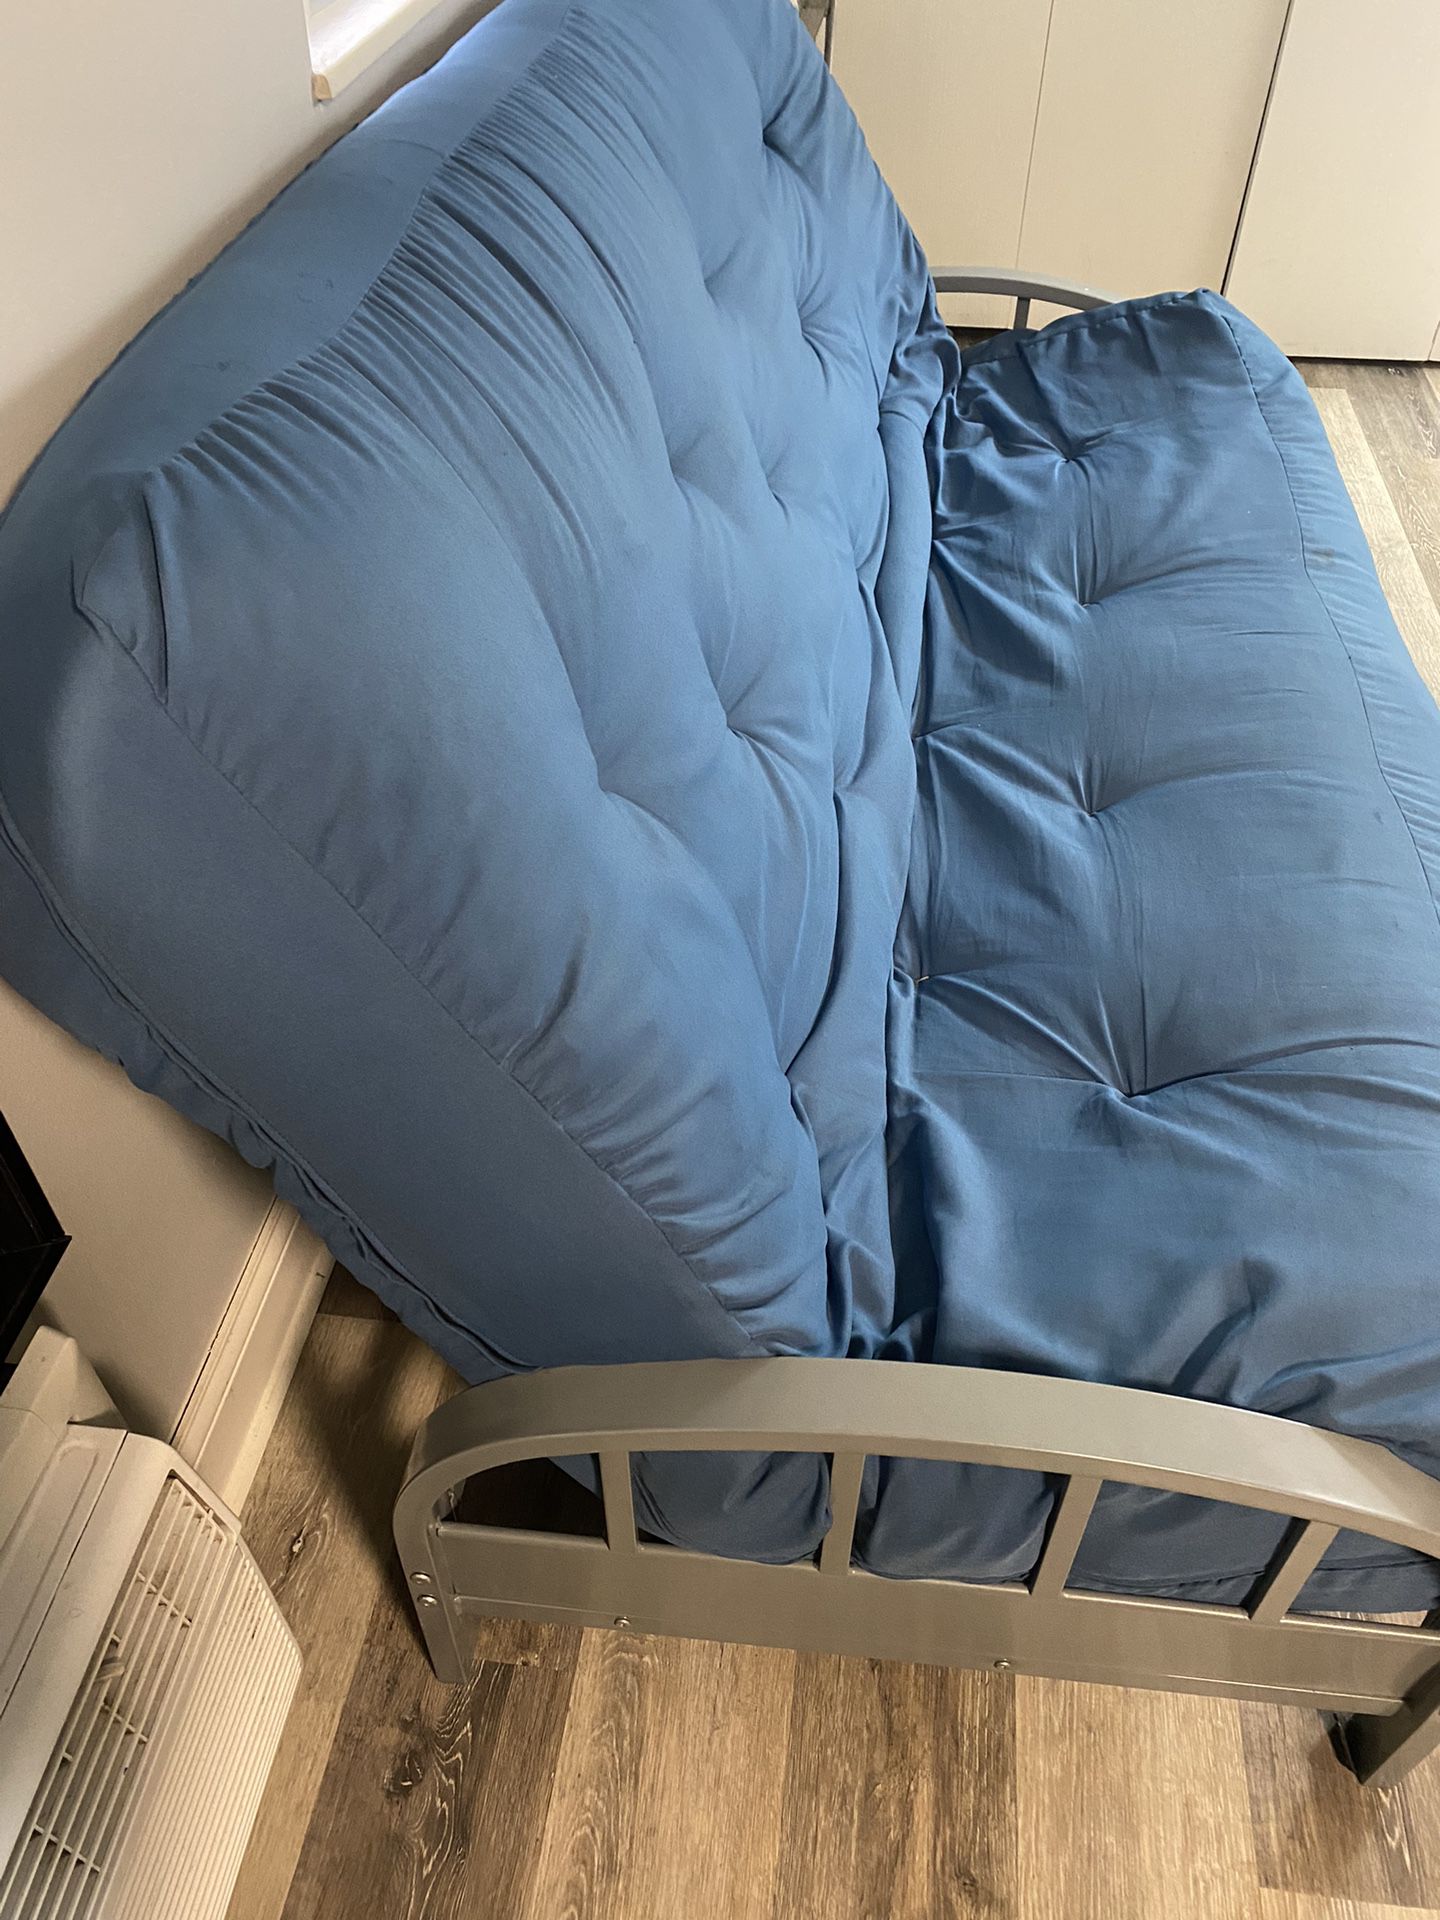 Teal Full Size Futon 12 In Mattress With Steel Frame